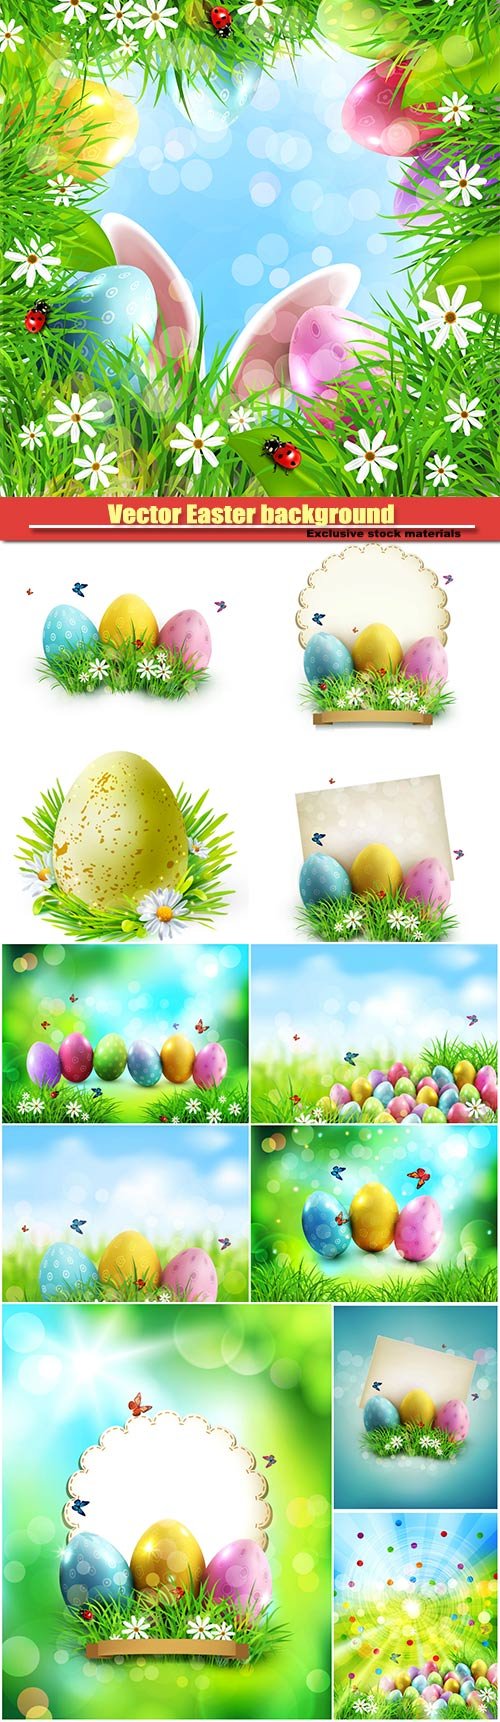 Vector Easter background, easter eggs in green grass with white flowers, butterflies on blue, blurred , natural background